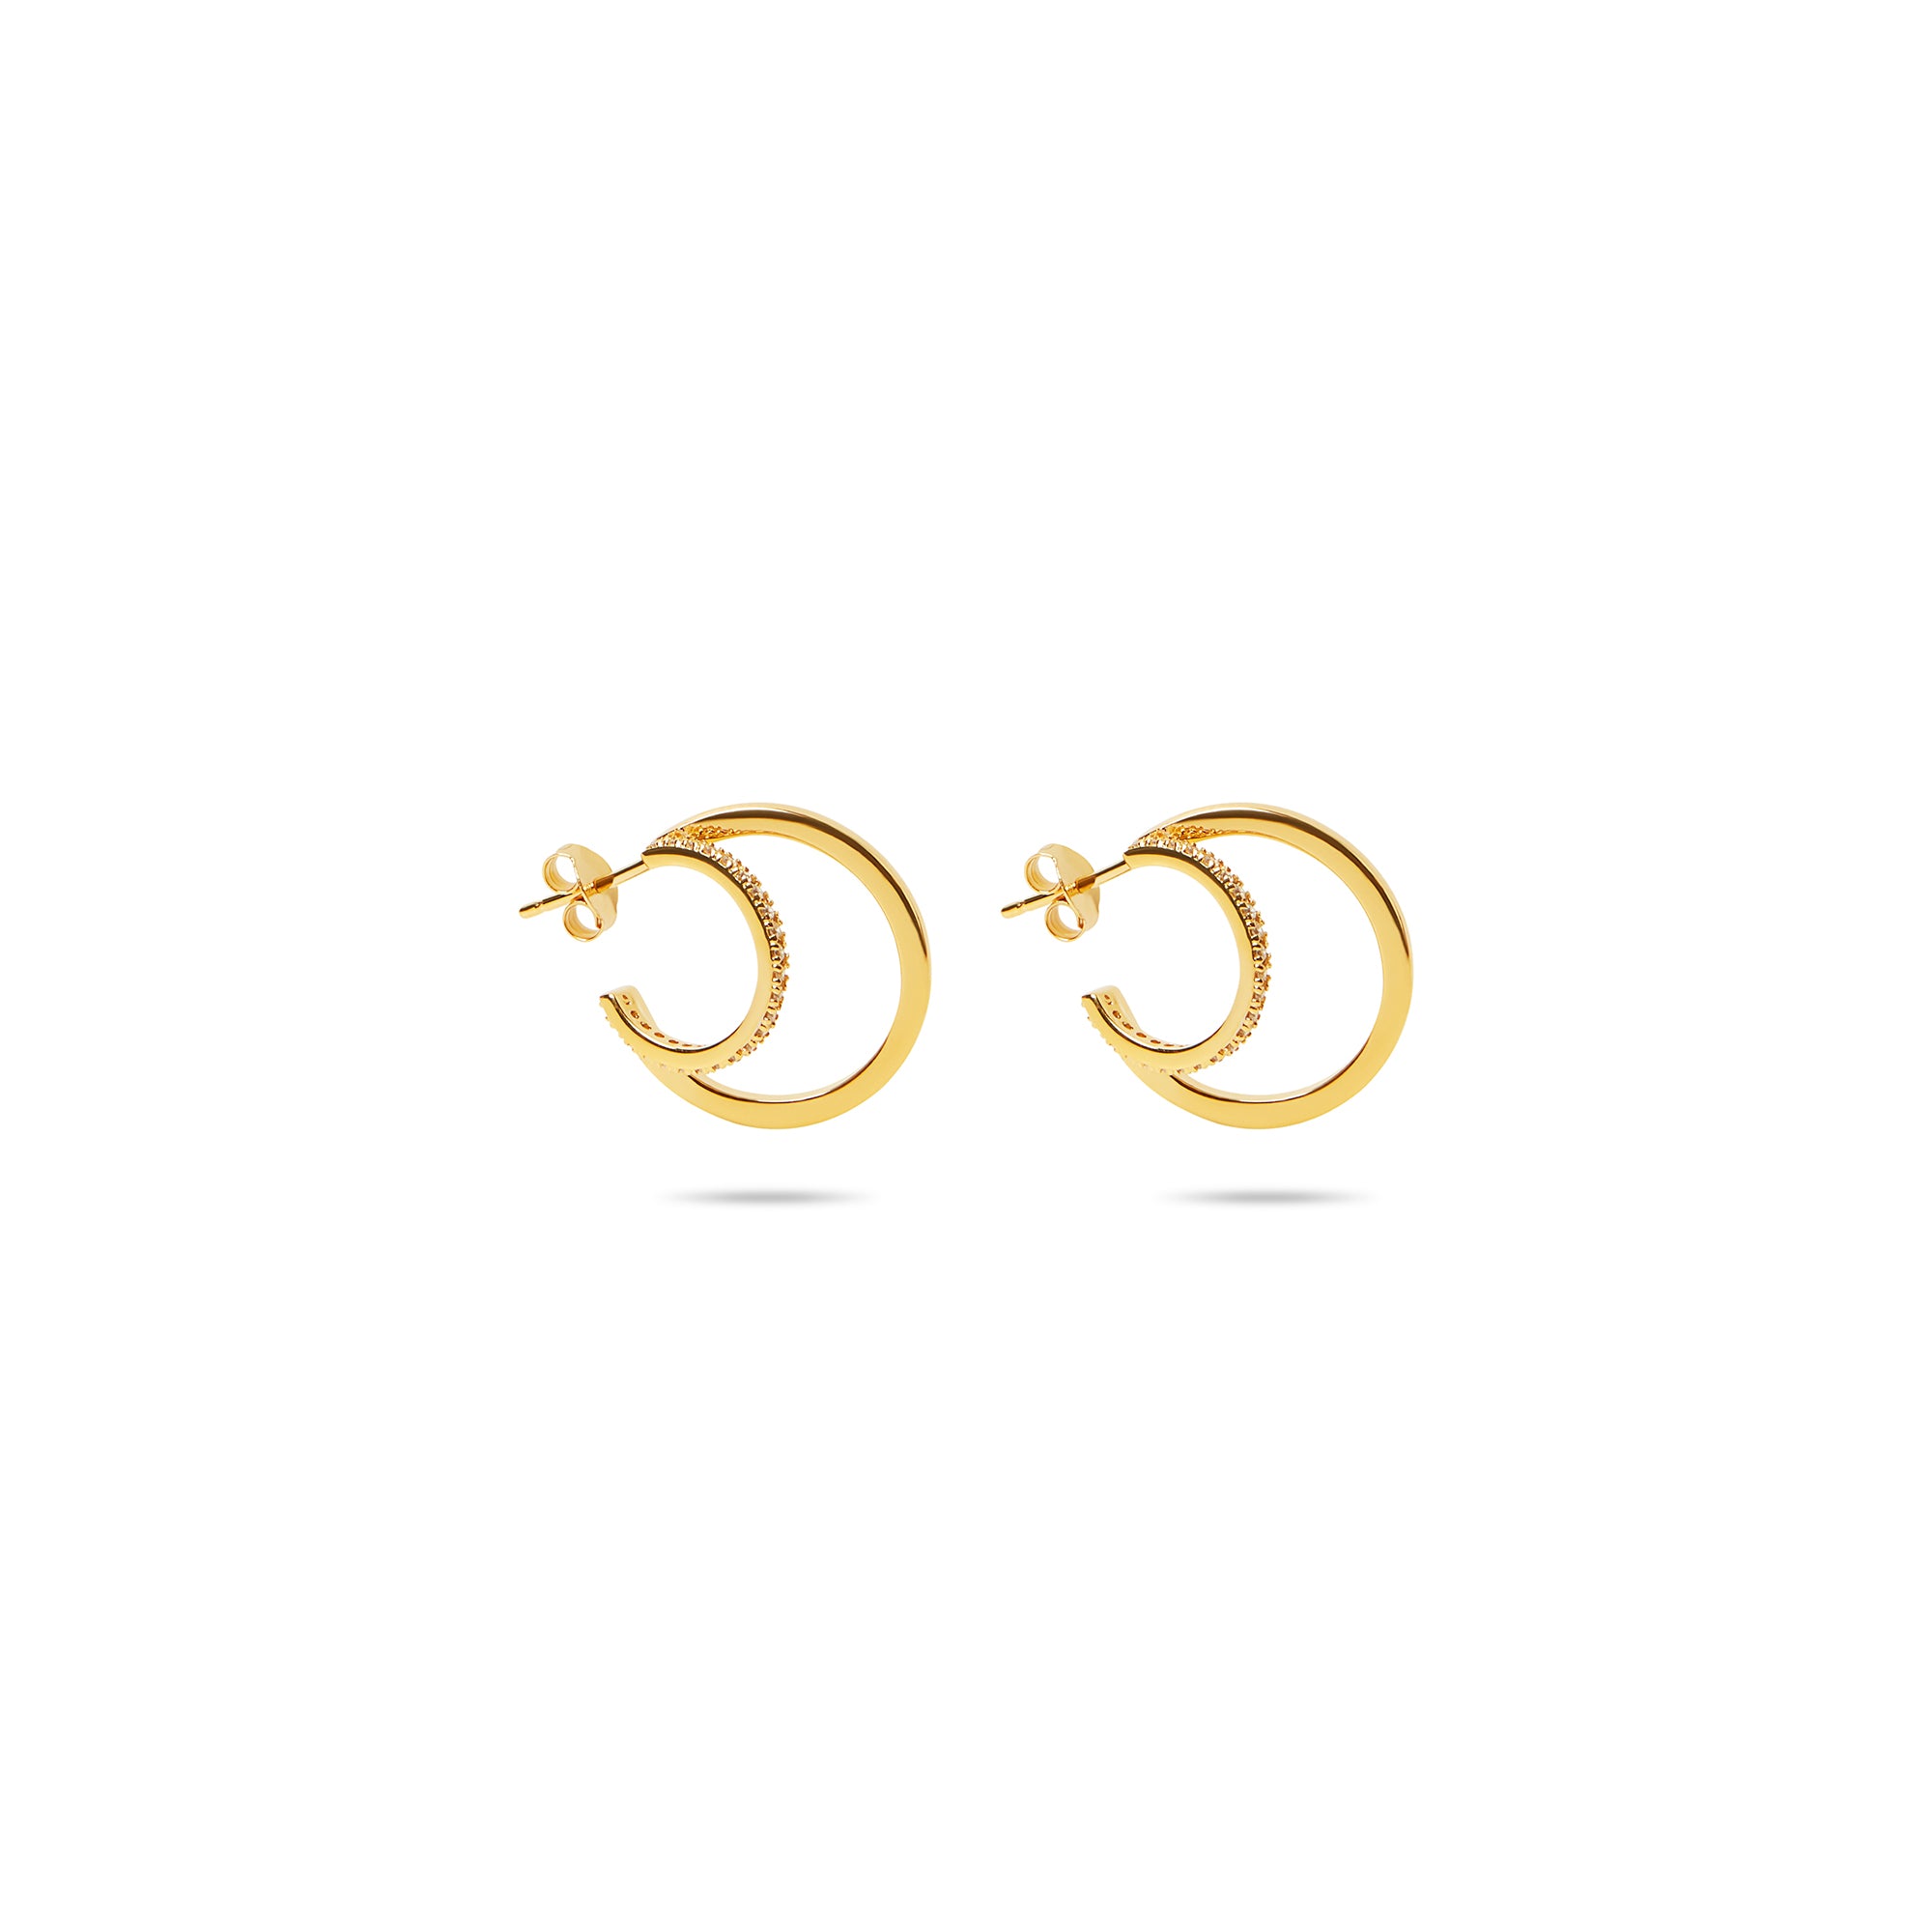 THE PAVE DOUBLE HOOP EARRING